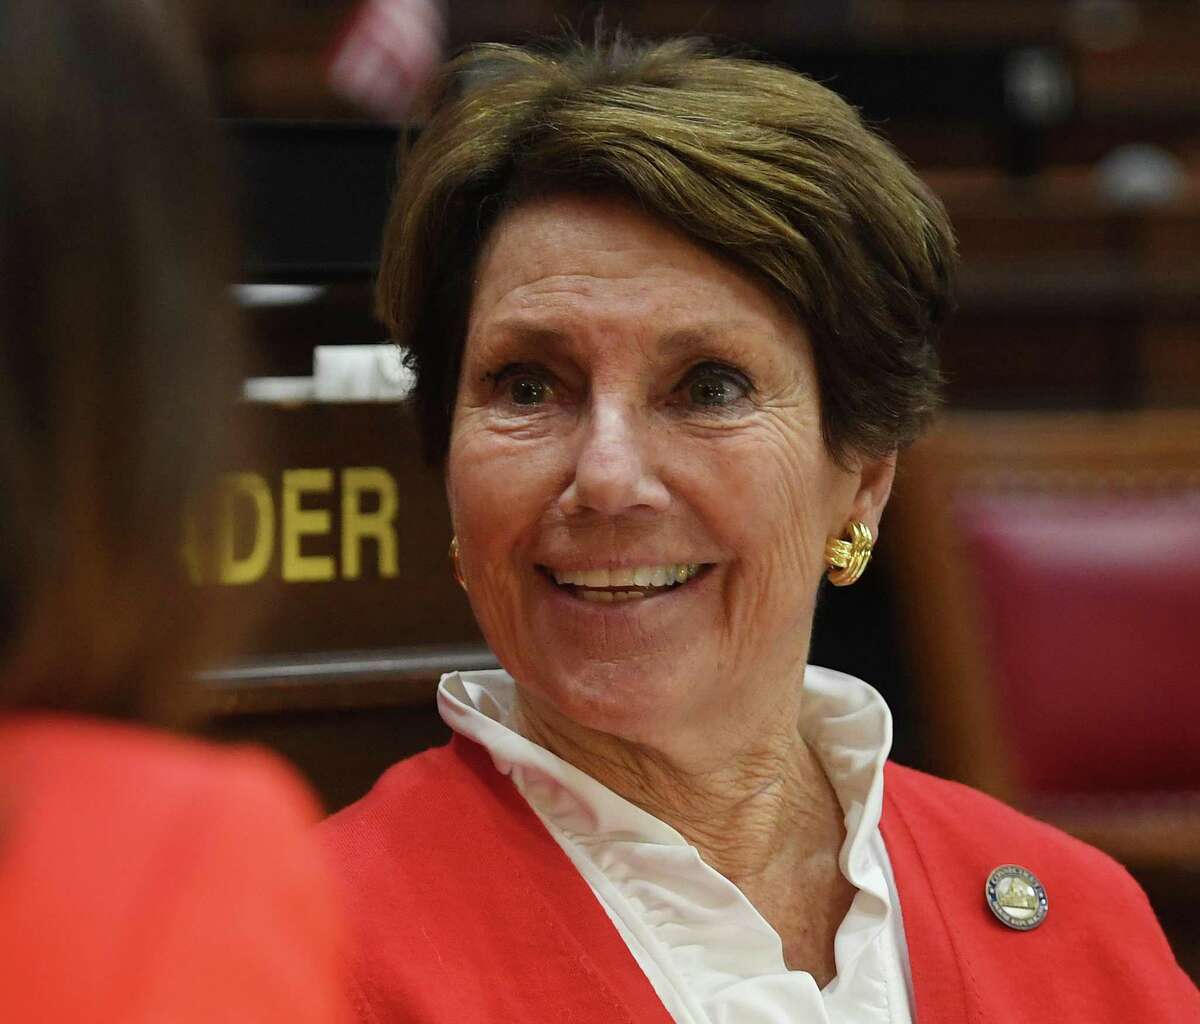 Rep. Livvy Floren, R-Greenwich, chats with a fellow legislator during opening session of the state legislature in Hartford, Conn. on Wednesday, February 05, 2020.